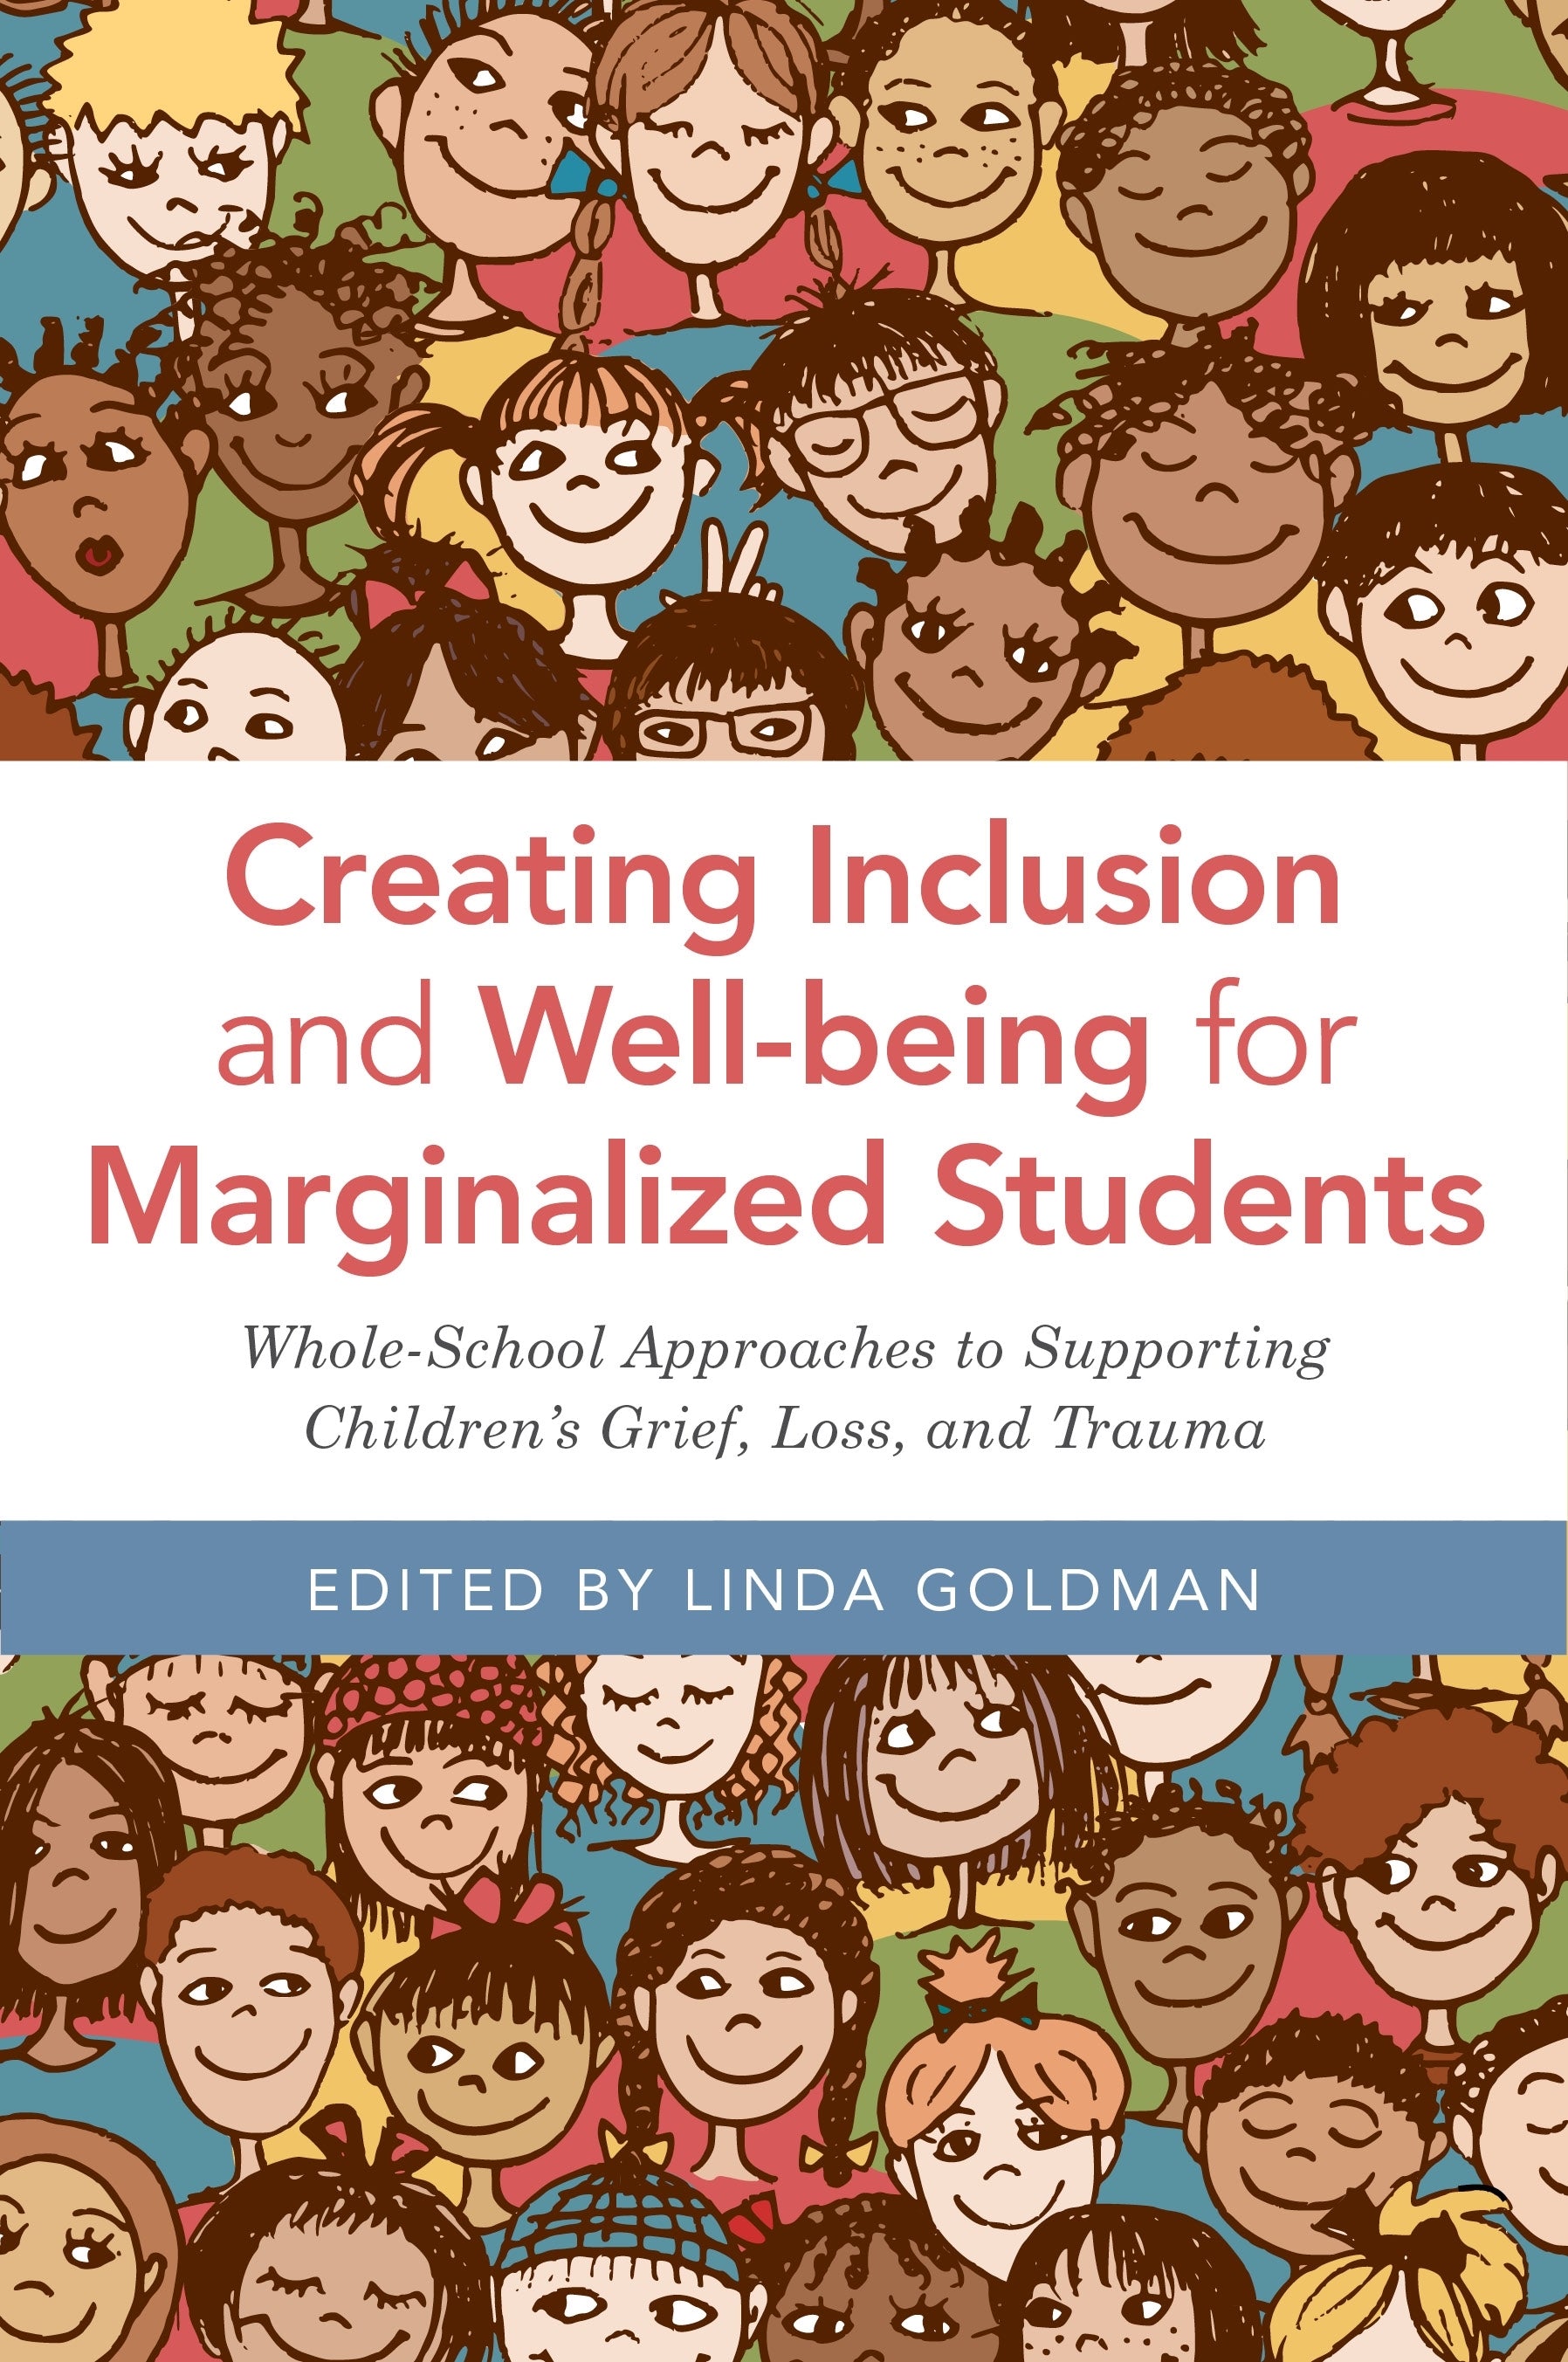 Creating Inclusion and Well-being for Marginalized Students by No Author Listed, Linda Goldman